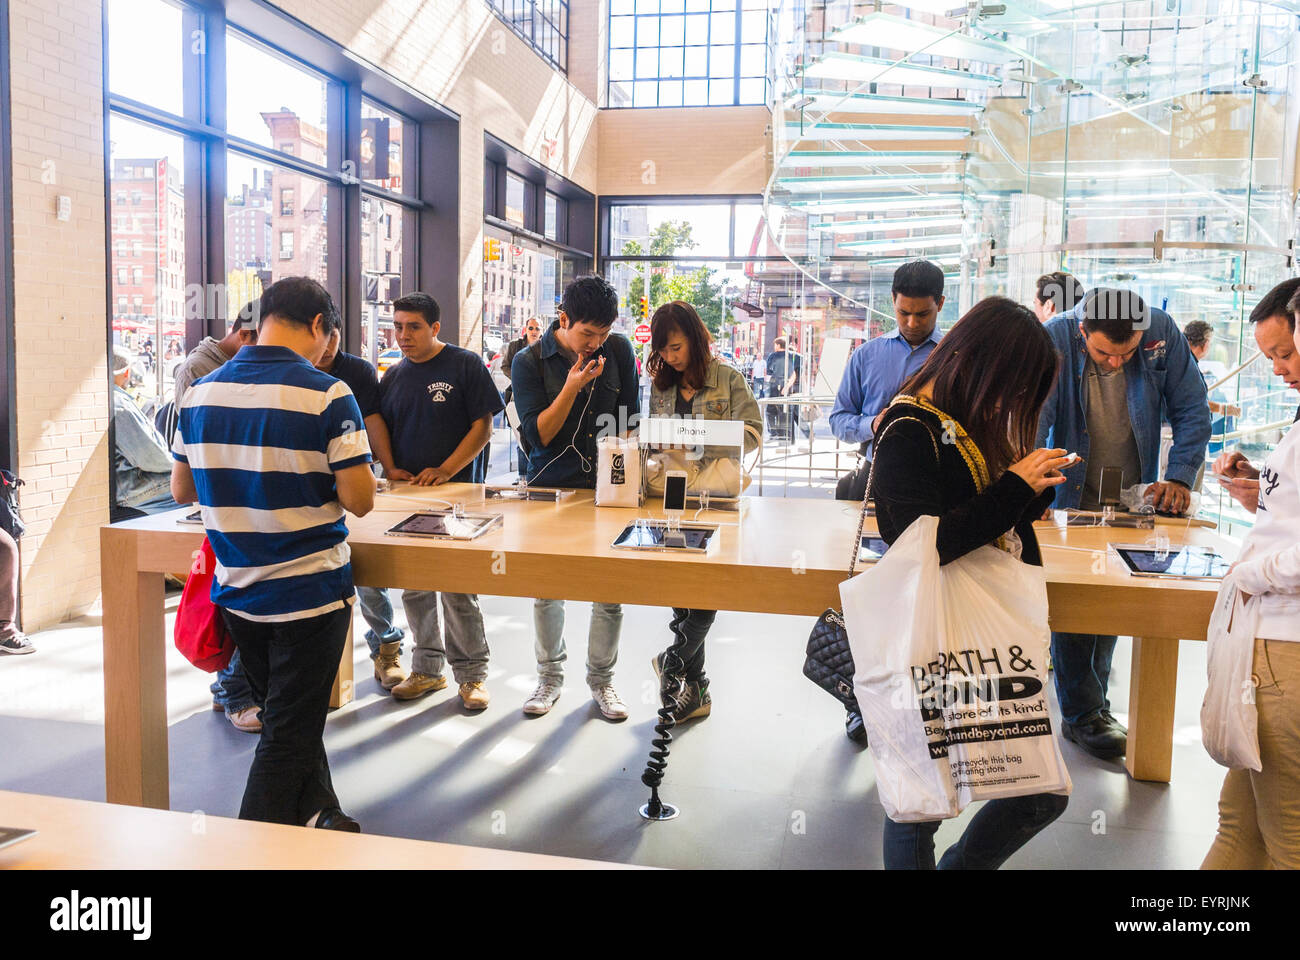 New York City, USA, People inside Apple Store in Manhattan, Trying new equipment, Consumer Products, apple showroom, smart phones public crowd, teenager group shopping store buying, shopper iphone Stock Photo